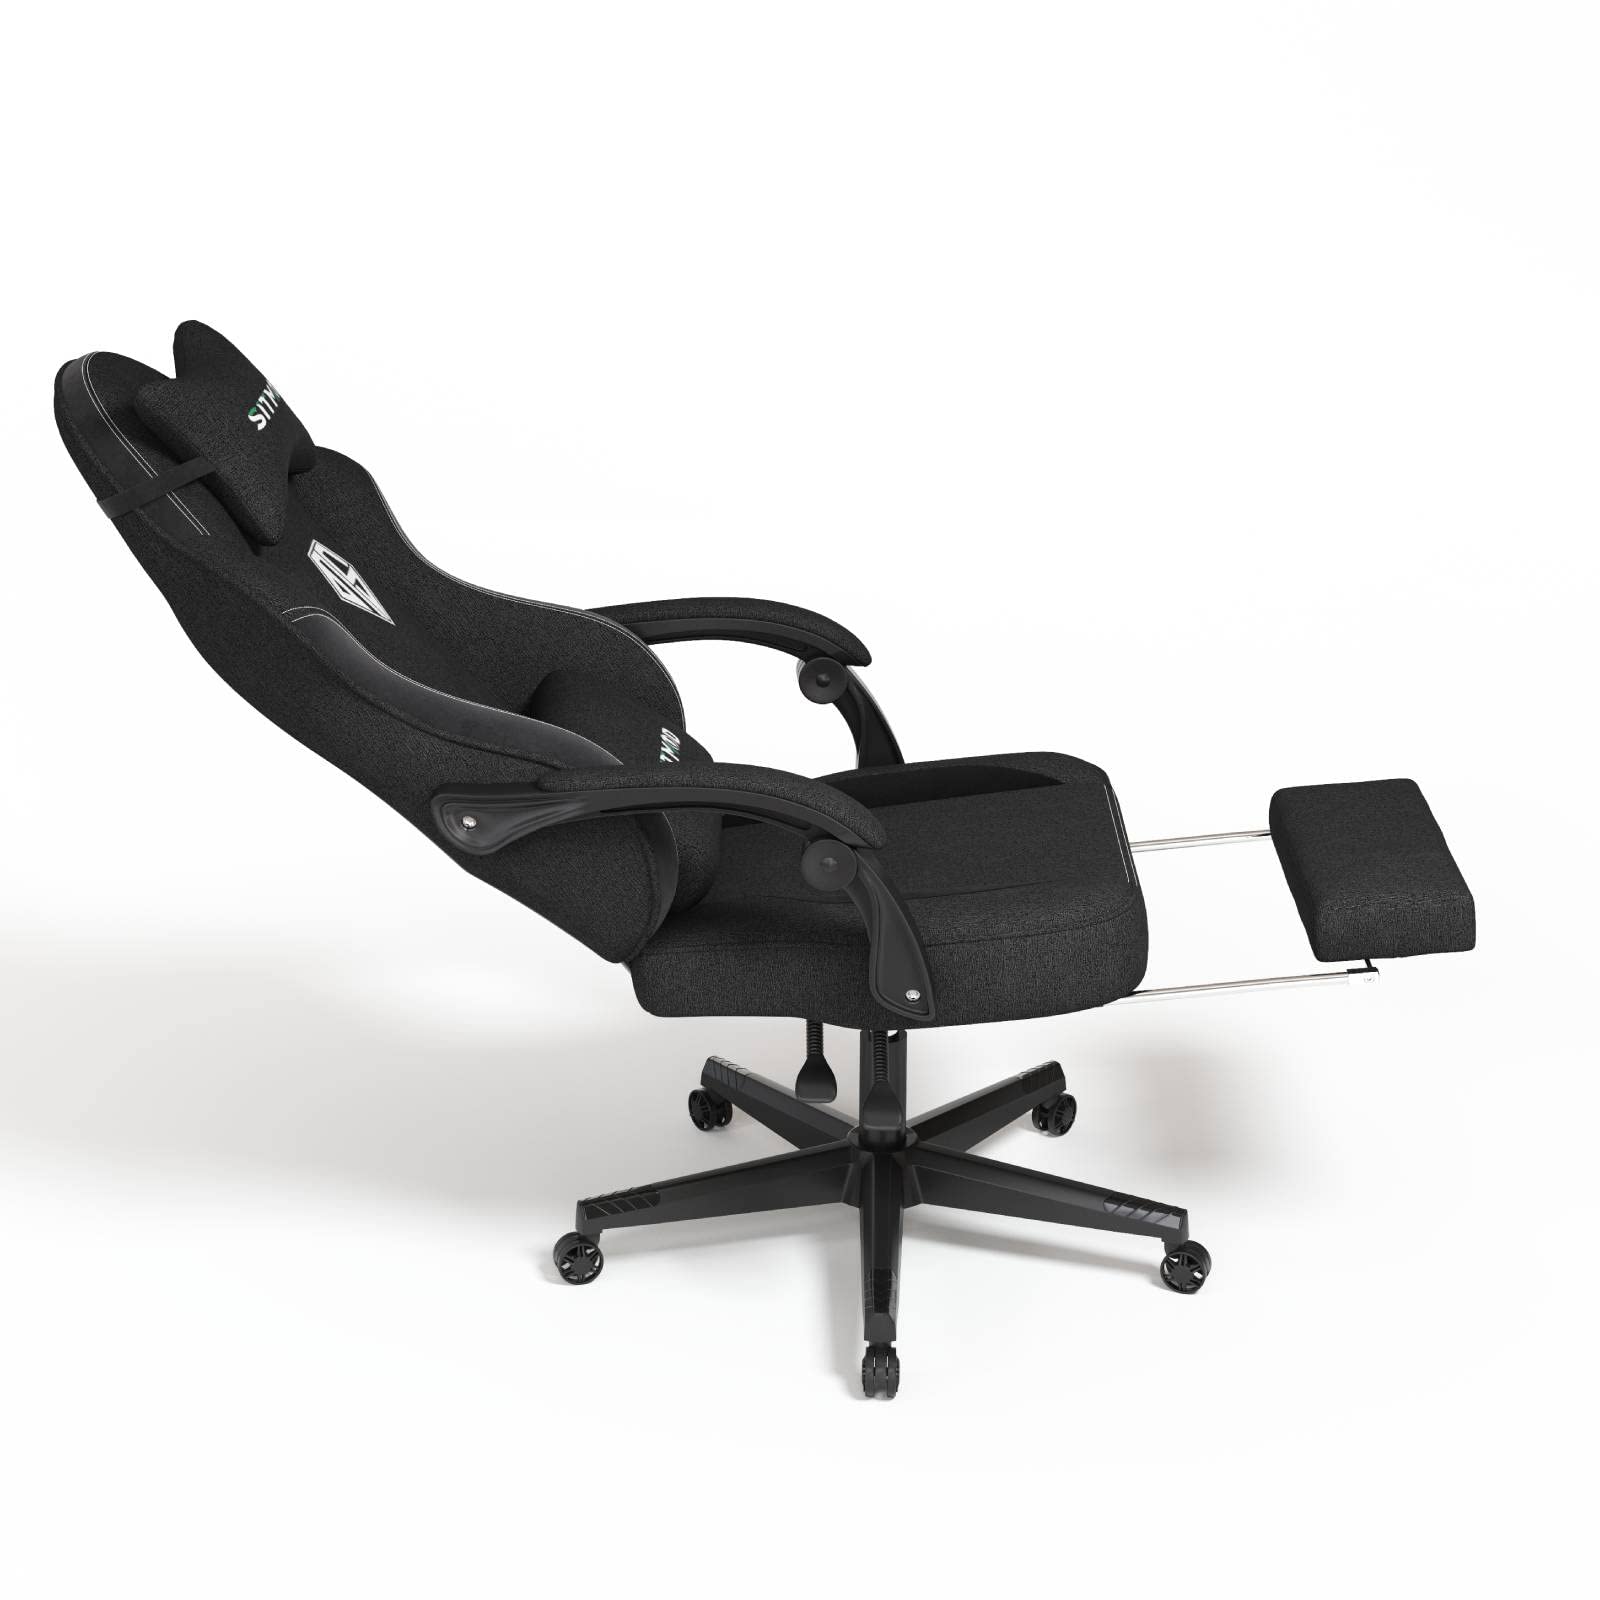 SITMOD gaming chair with Footrest-Pc computer Ergonomic Video game chair-Backrest and Seat Height Adjustable Swivel Task chair f